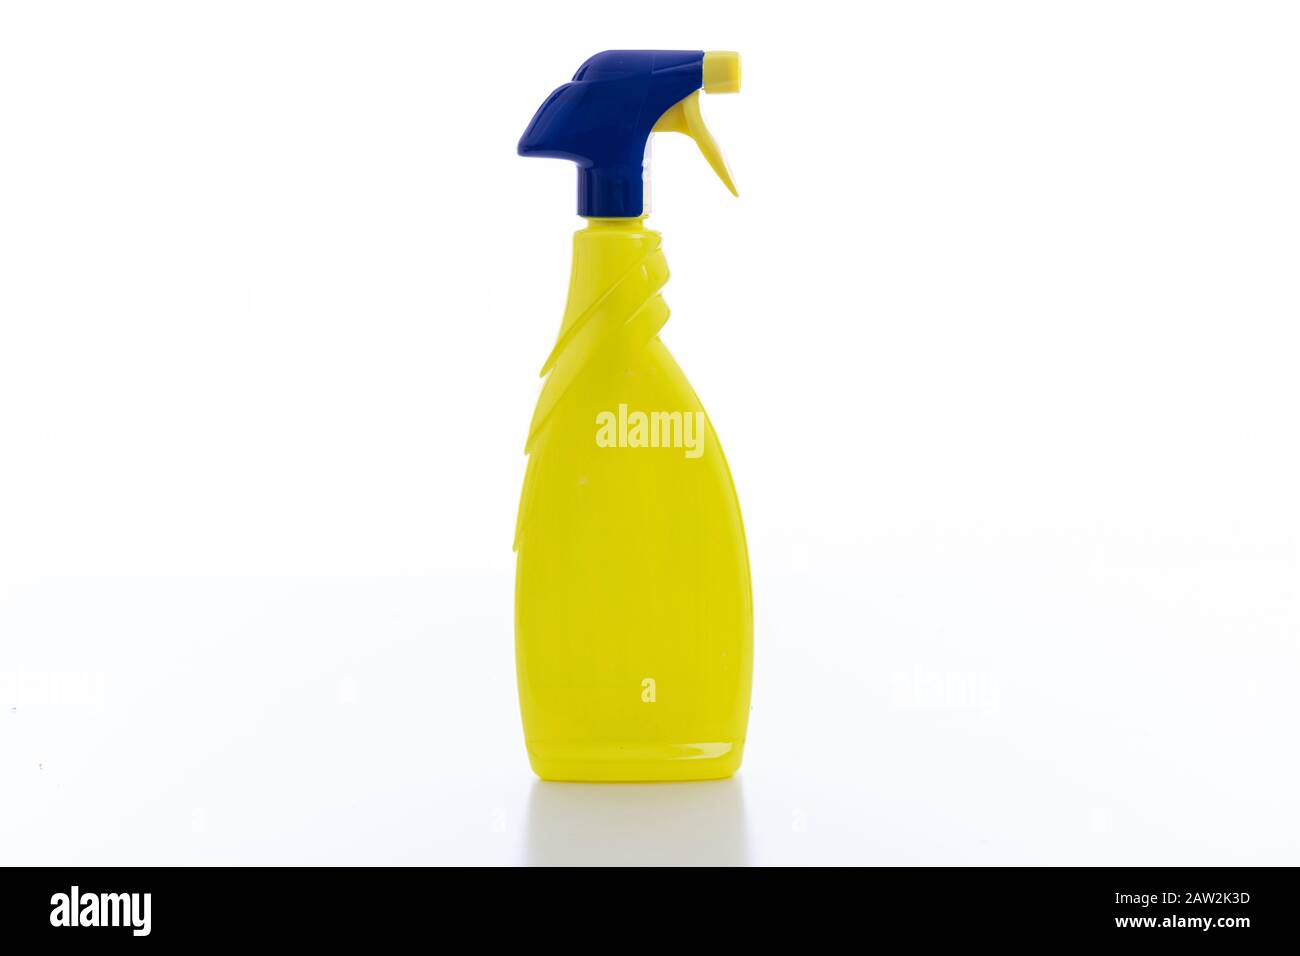 Cleaning spray bottle yellow color with blue trigger isolated against white background. Chemical detergent product no name template, blank empty, copy Stock Photo